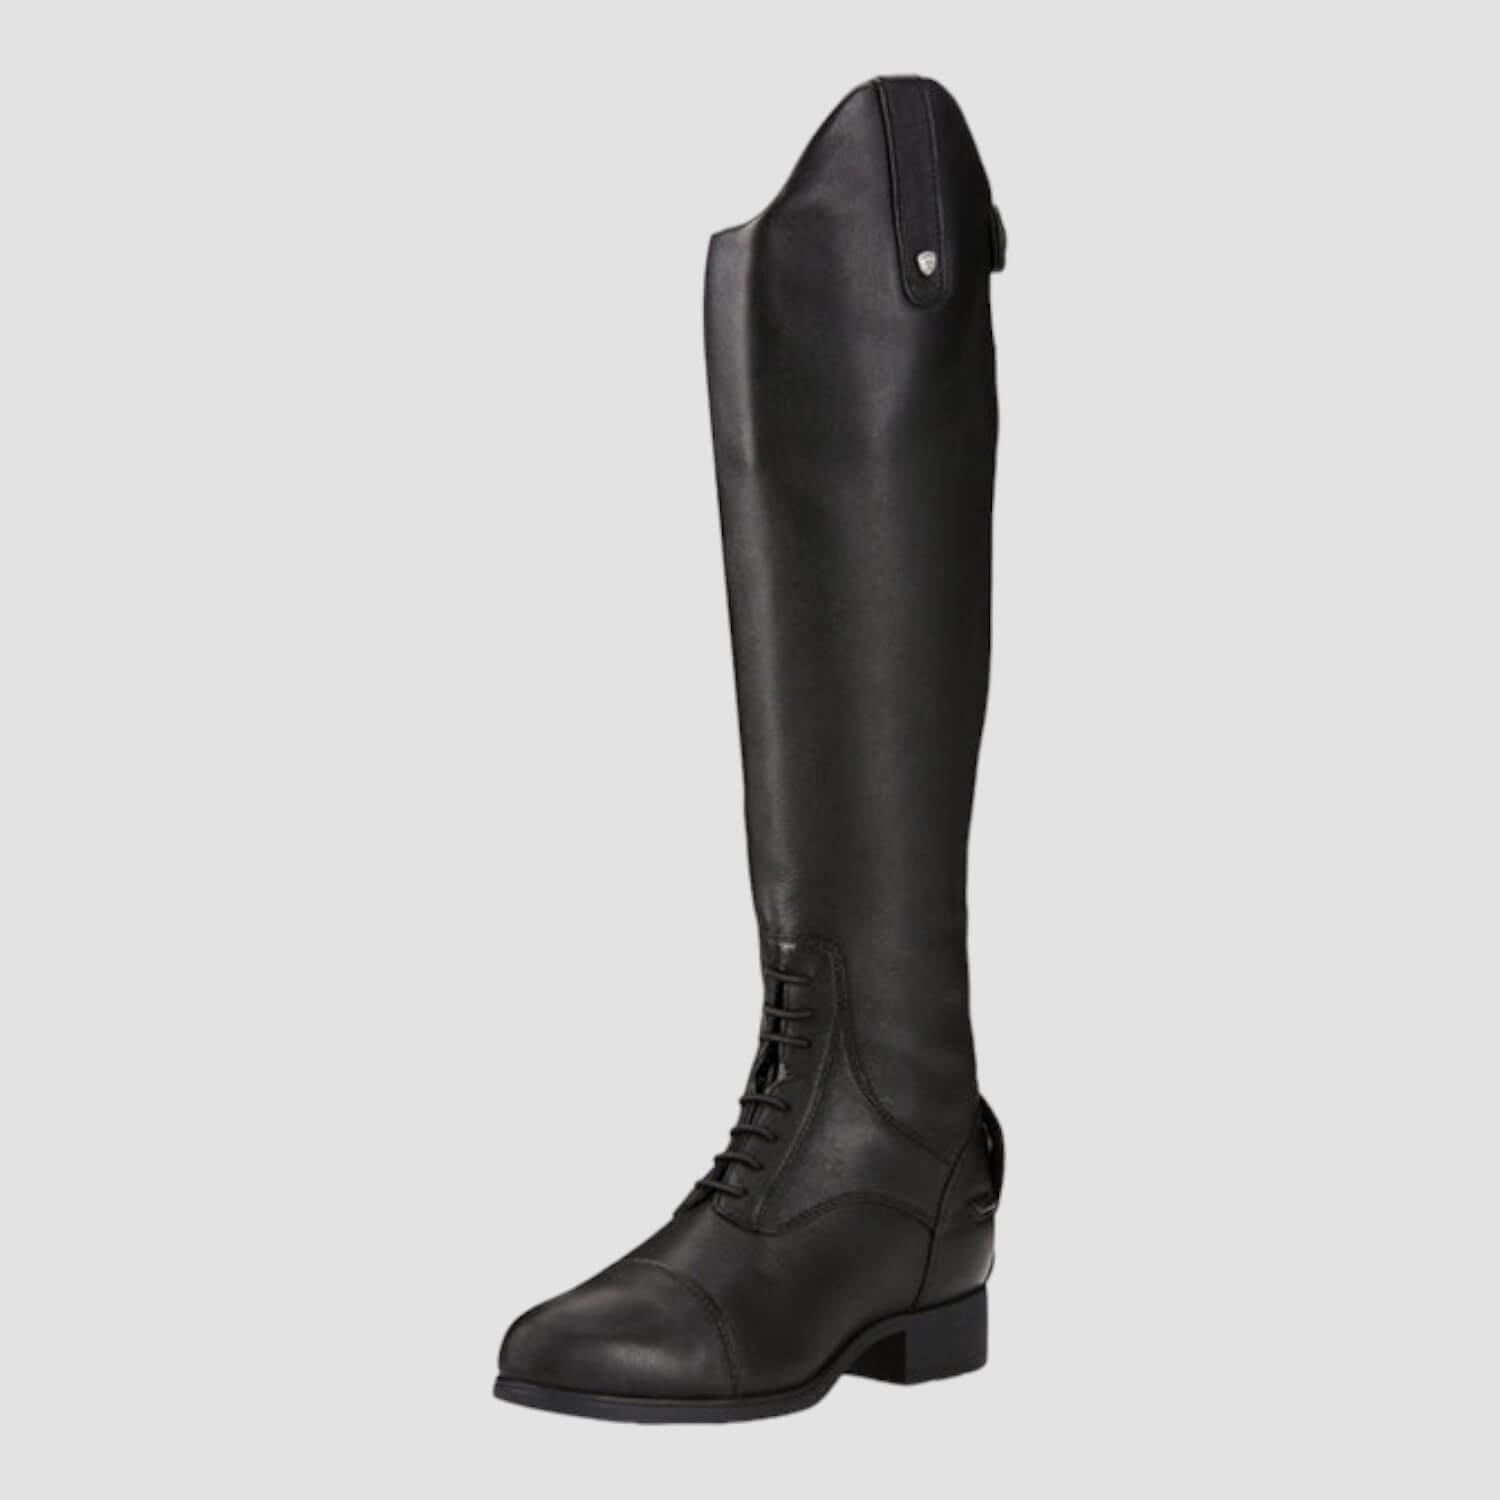 Ariat Bromont Pro Tall H2O Insulated